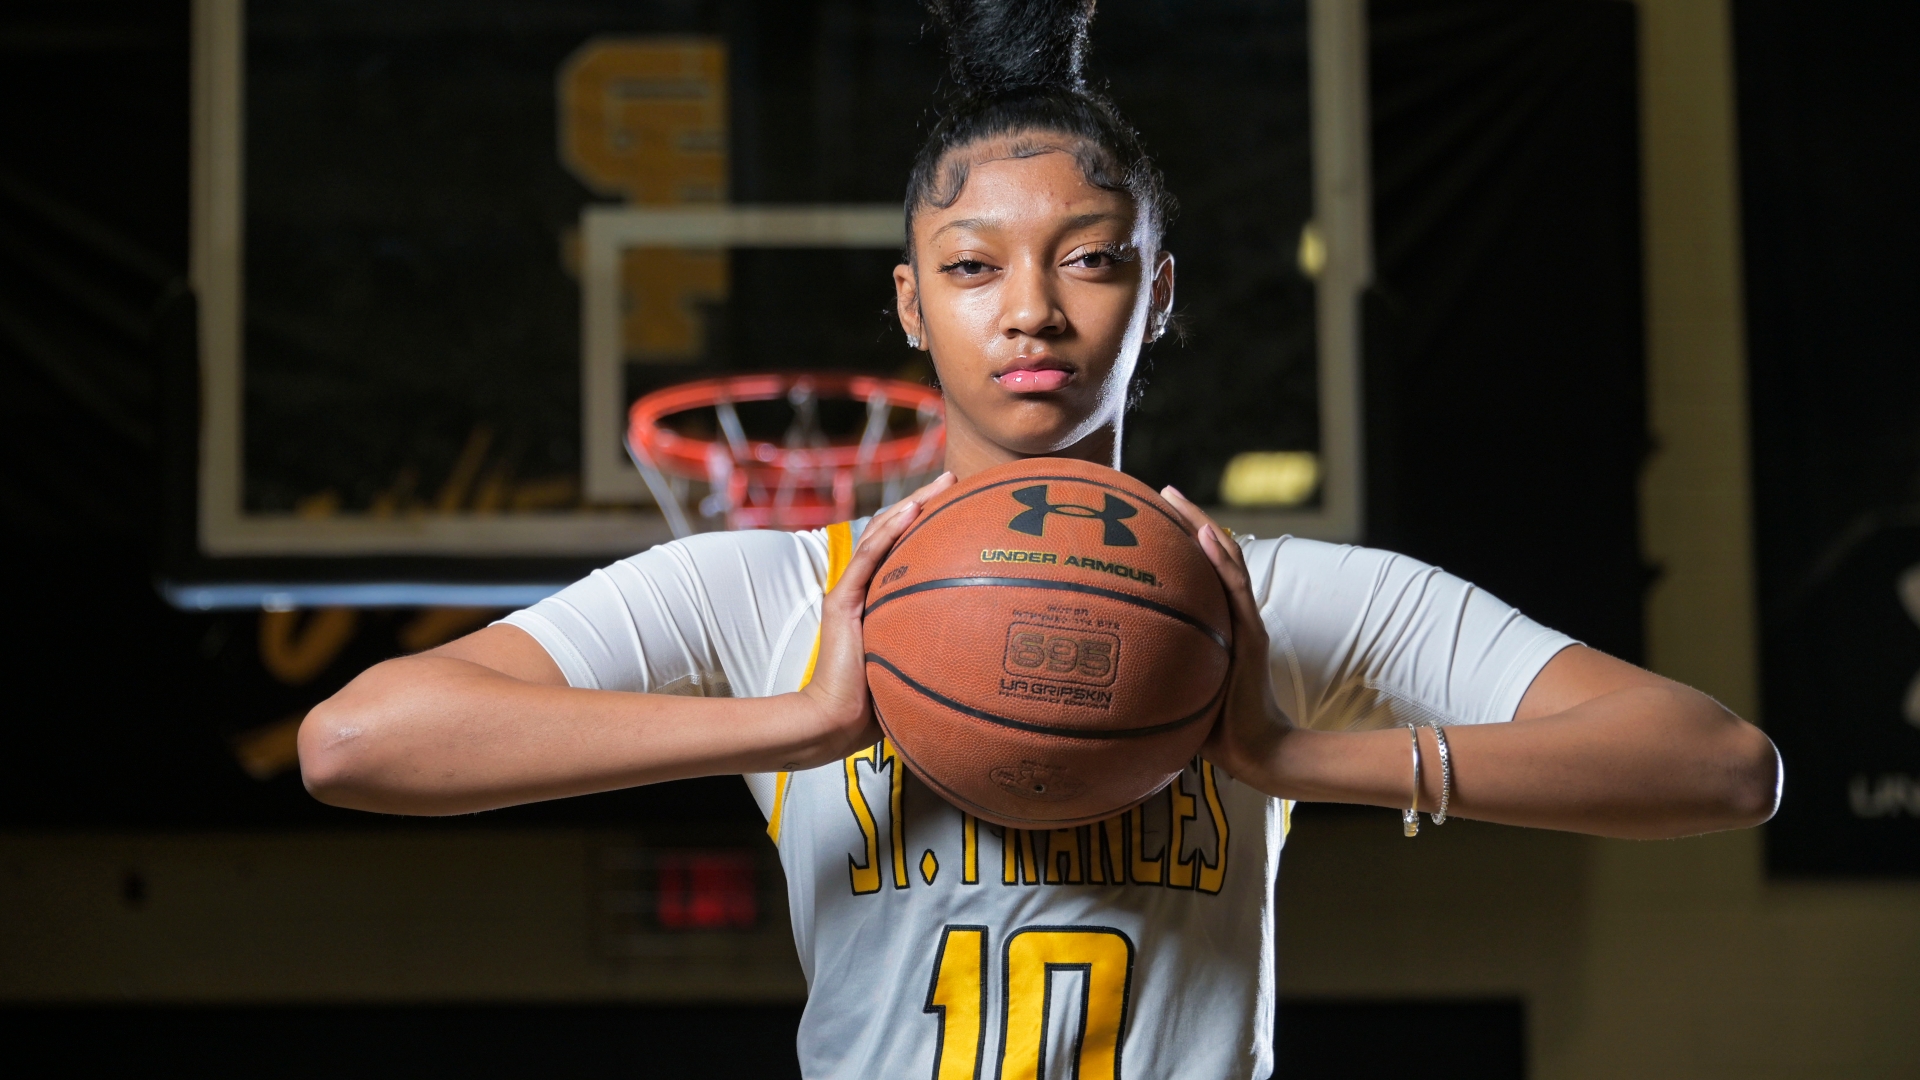 2019 20 High School Female Athlete Of The Year: St. Frances Basketball Star Angel Reese